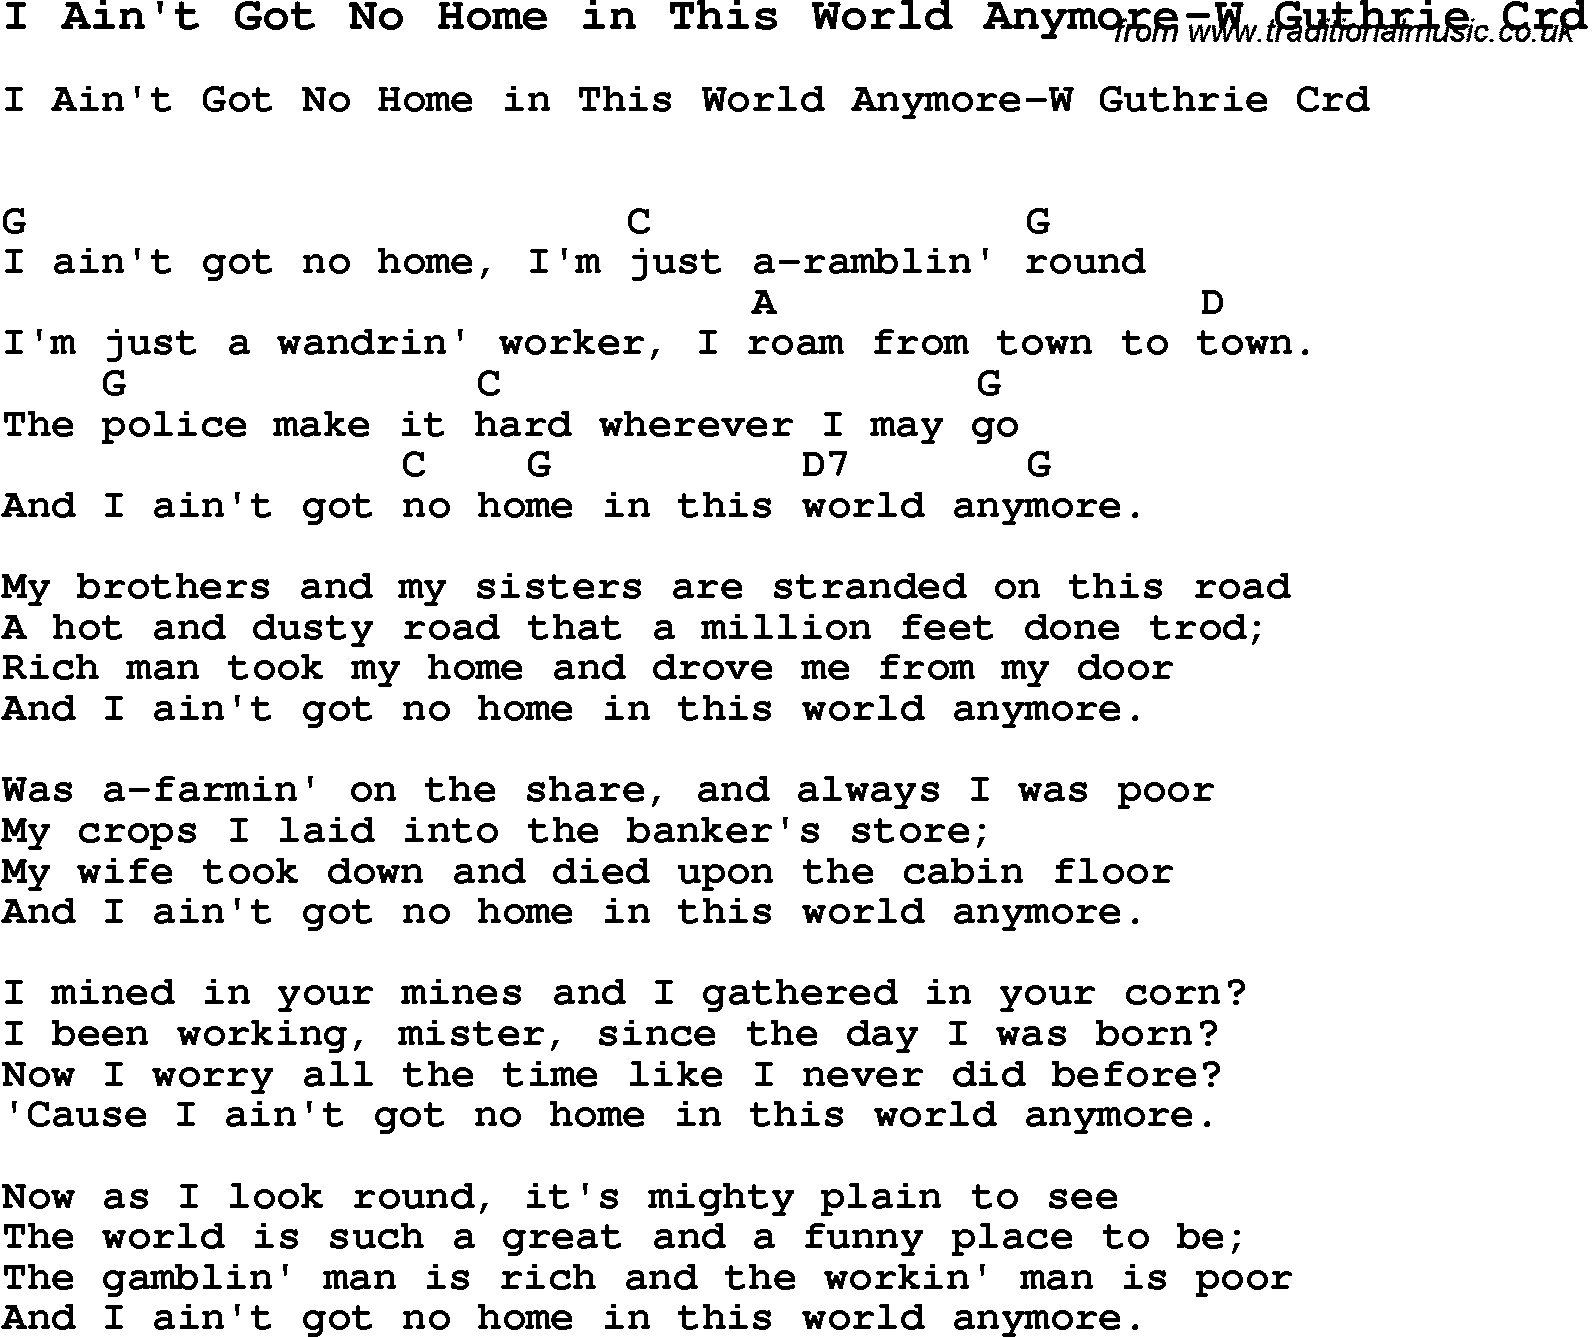 Skiffle Song Lyrics for I Ain't Got No Home In This World Anymore-W Guthrie with chords for Mandolin, Ukulele, Guitar, Banjo etc.